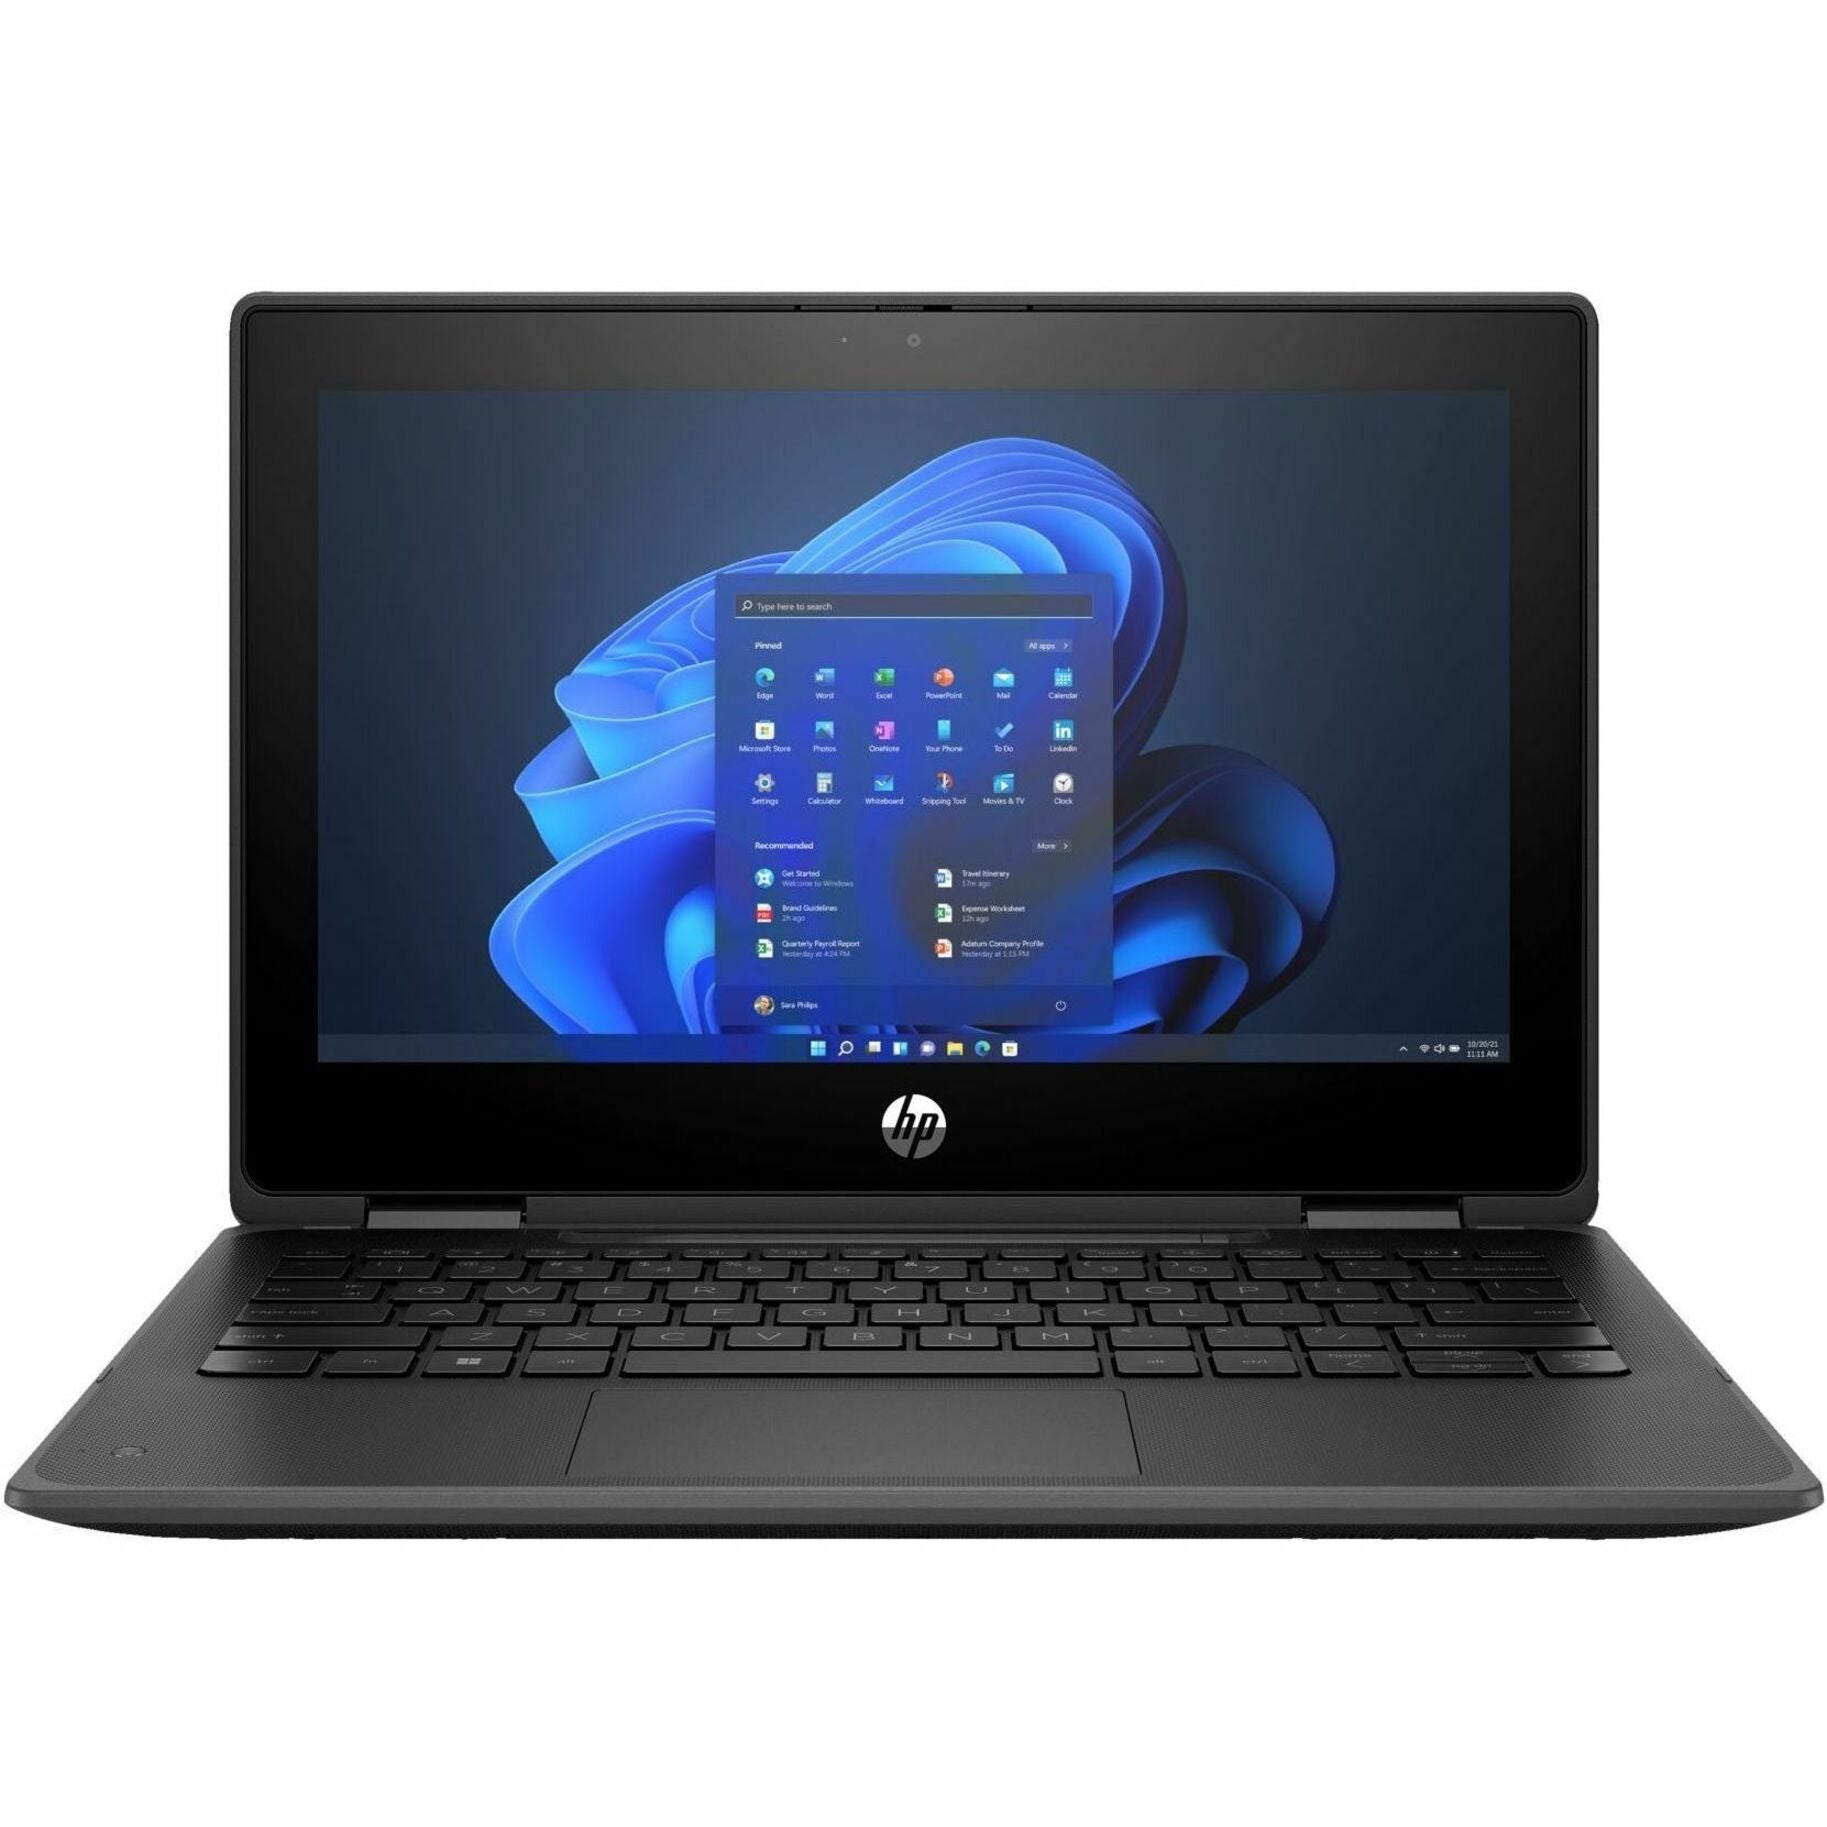 HP Pro x360 Fortis 11 inch G9 Notebook PC - Convertible 2 in 1 Laptop [Discontinued]